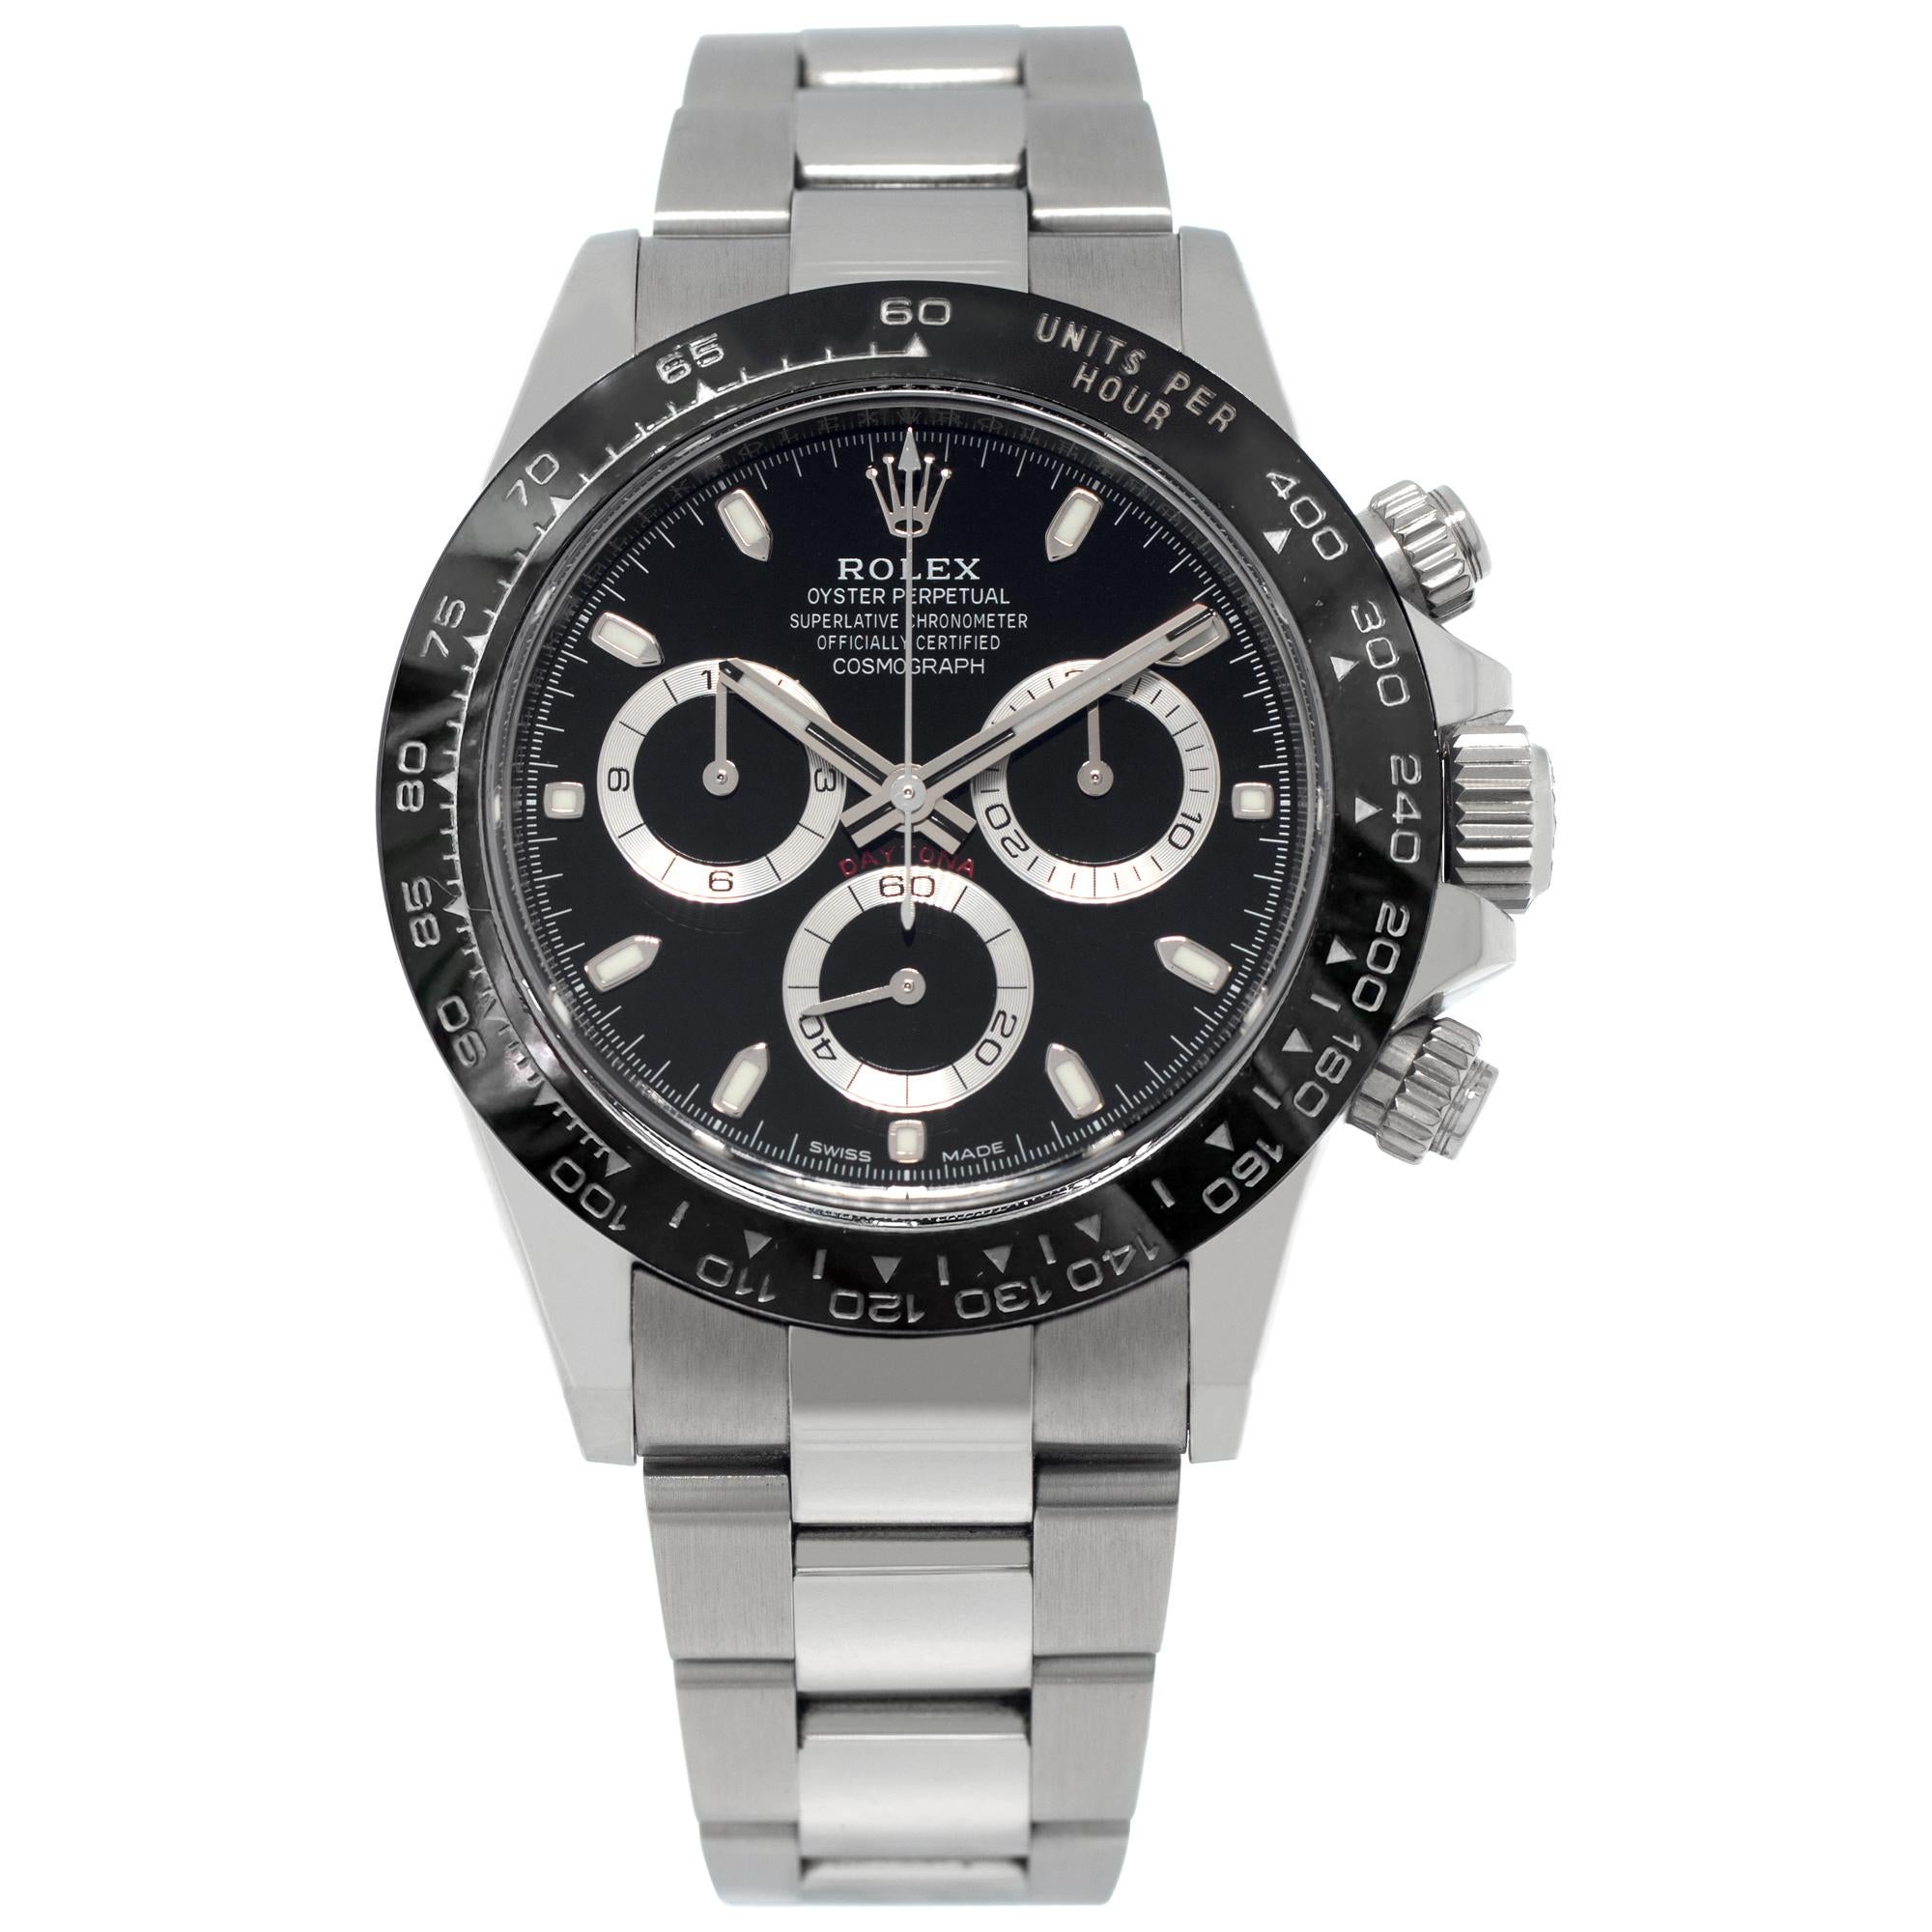 Rolex Daytona 116500LN in Stainless Steel with a Black dial 40mm Automatic watch For Sale